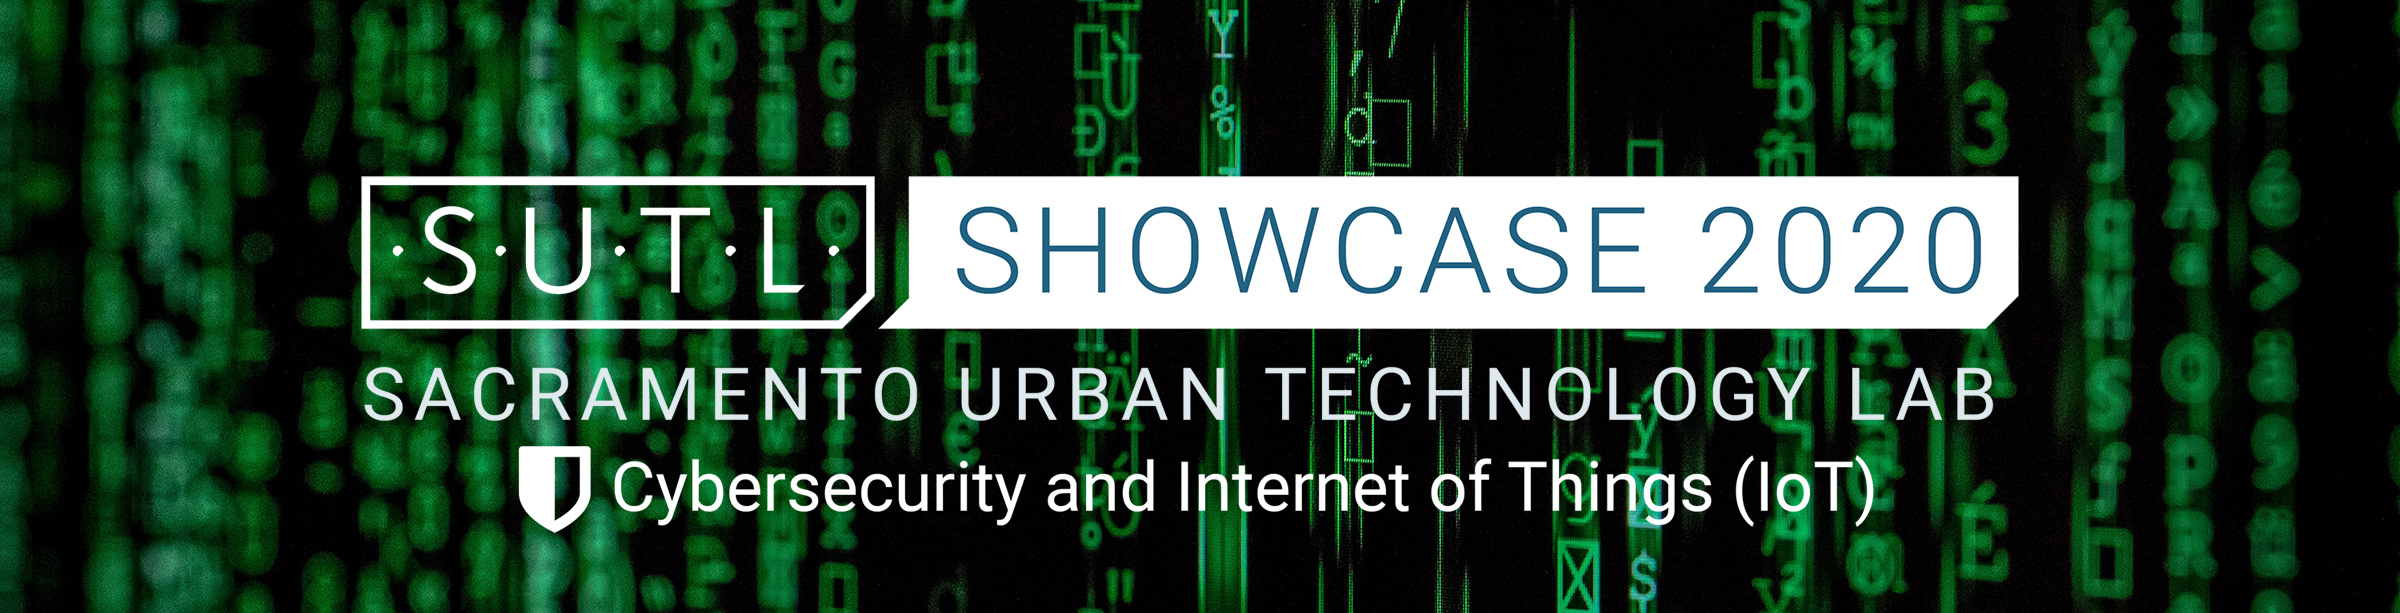 Cybersecurity and IoT Showcase Event